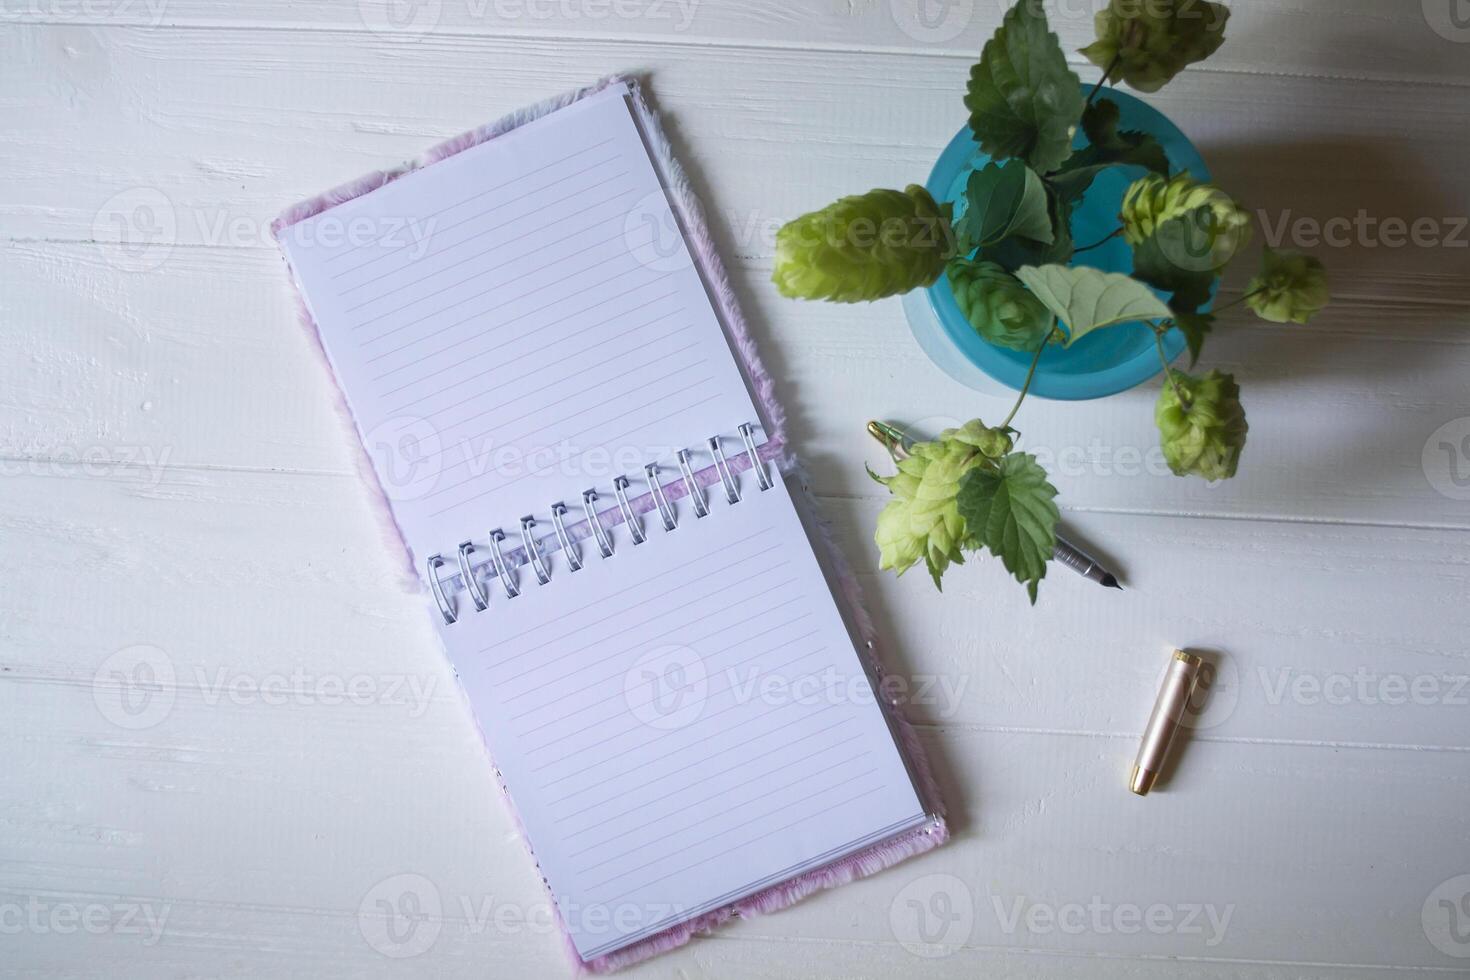 The opened notepad, pen, white candle, glasses and branches of hops as decoration on a white wooden table. Desktop still life with space for text. photo